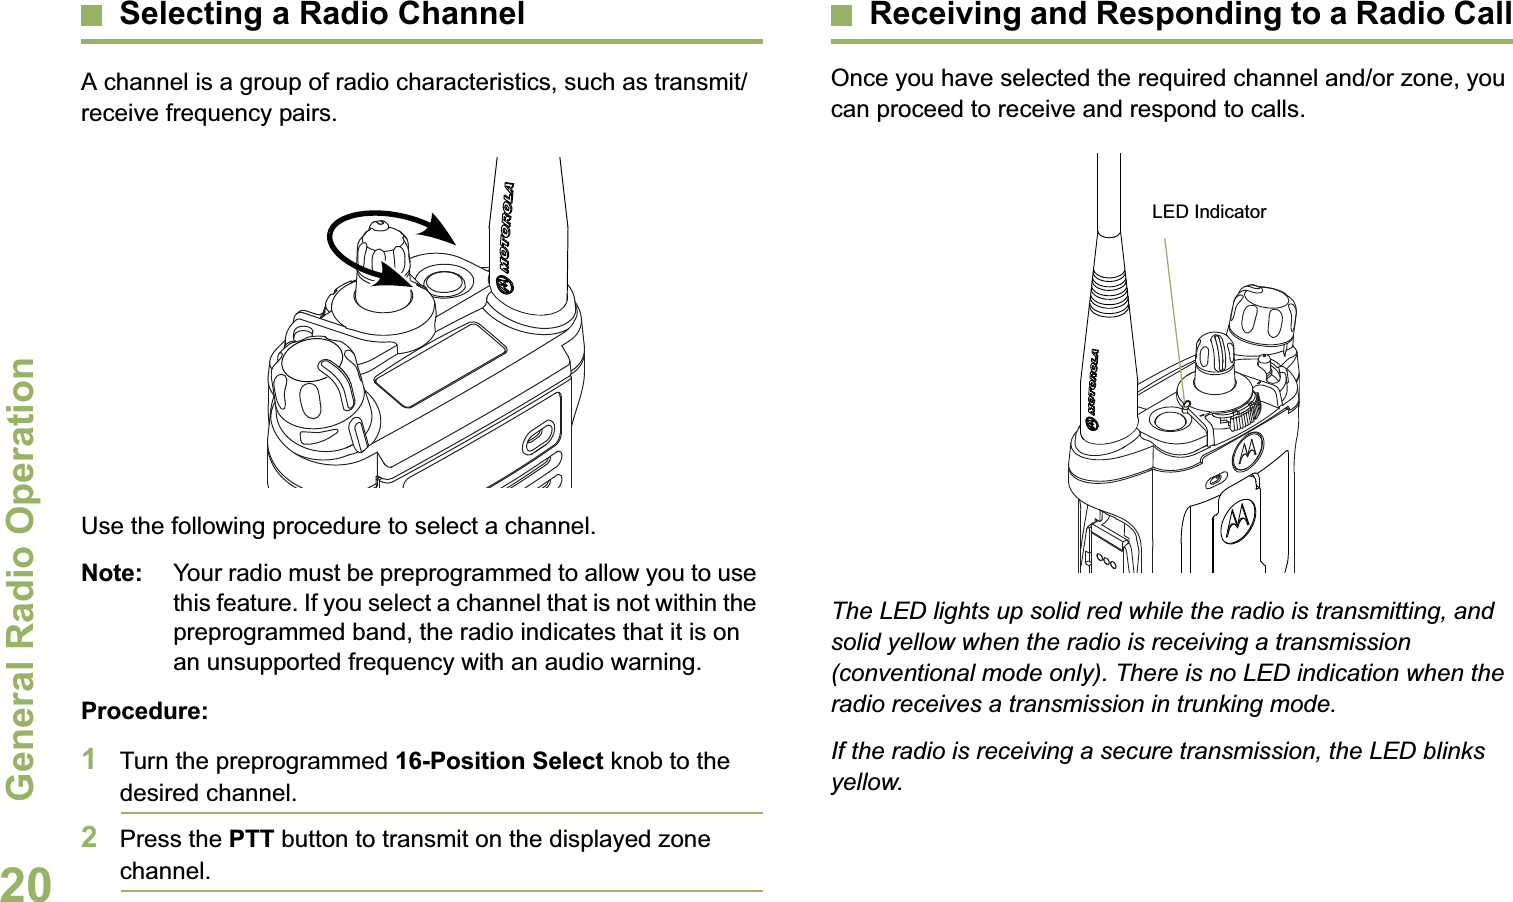 General Radio OperationEnglish20Selecting a Radio ChannelA channel is a group of radio characteristics, such as transmit/receive frequency pairs.Use the following procedure to select a channel.Note: Your radio must be preprogrammed to allow you to use this feature. If you select a channel that is not within the preprogrammed band, the radio indicates that it is on an unsupported frequency with an audio warning.Procedure:1Turn the preprogrammed 16-Position Select knob to the desired channel. 2Press the PTT button to transmit on the displayed zone channel.Receiving and Responding to a Radio CallOnce you have selected the required channel and/or zone, you can proceed to receive and respond to calls.The LED lights up solid red while the radio is transmitting, and solid yellow when the radio is receiving a transmission (conventional mode only). There is no LED indication when the radio receives a transmission in trunking mode.If the radio is receiving a secure transmission, the LED blinks yellow.LED Indicator